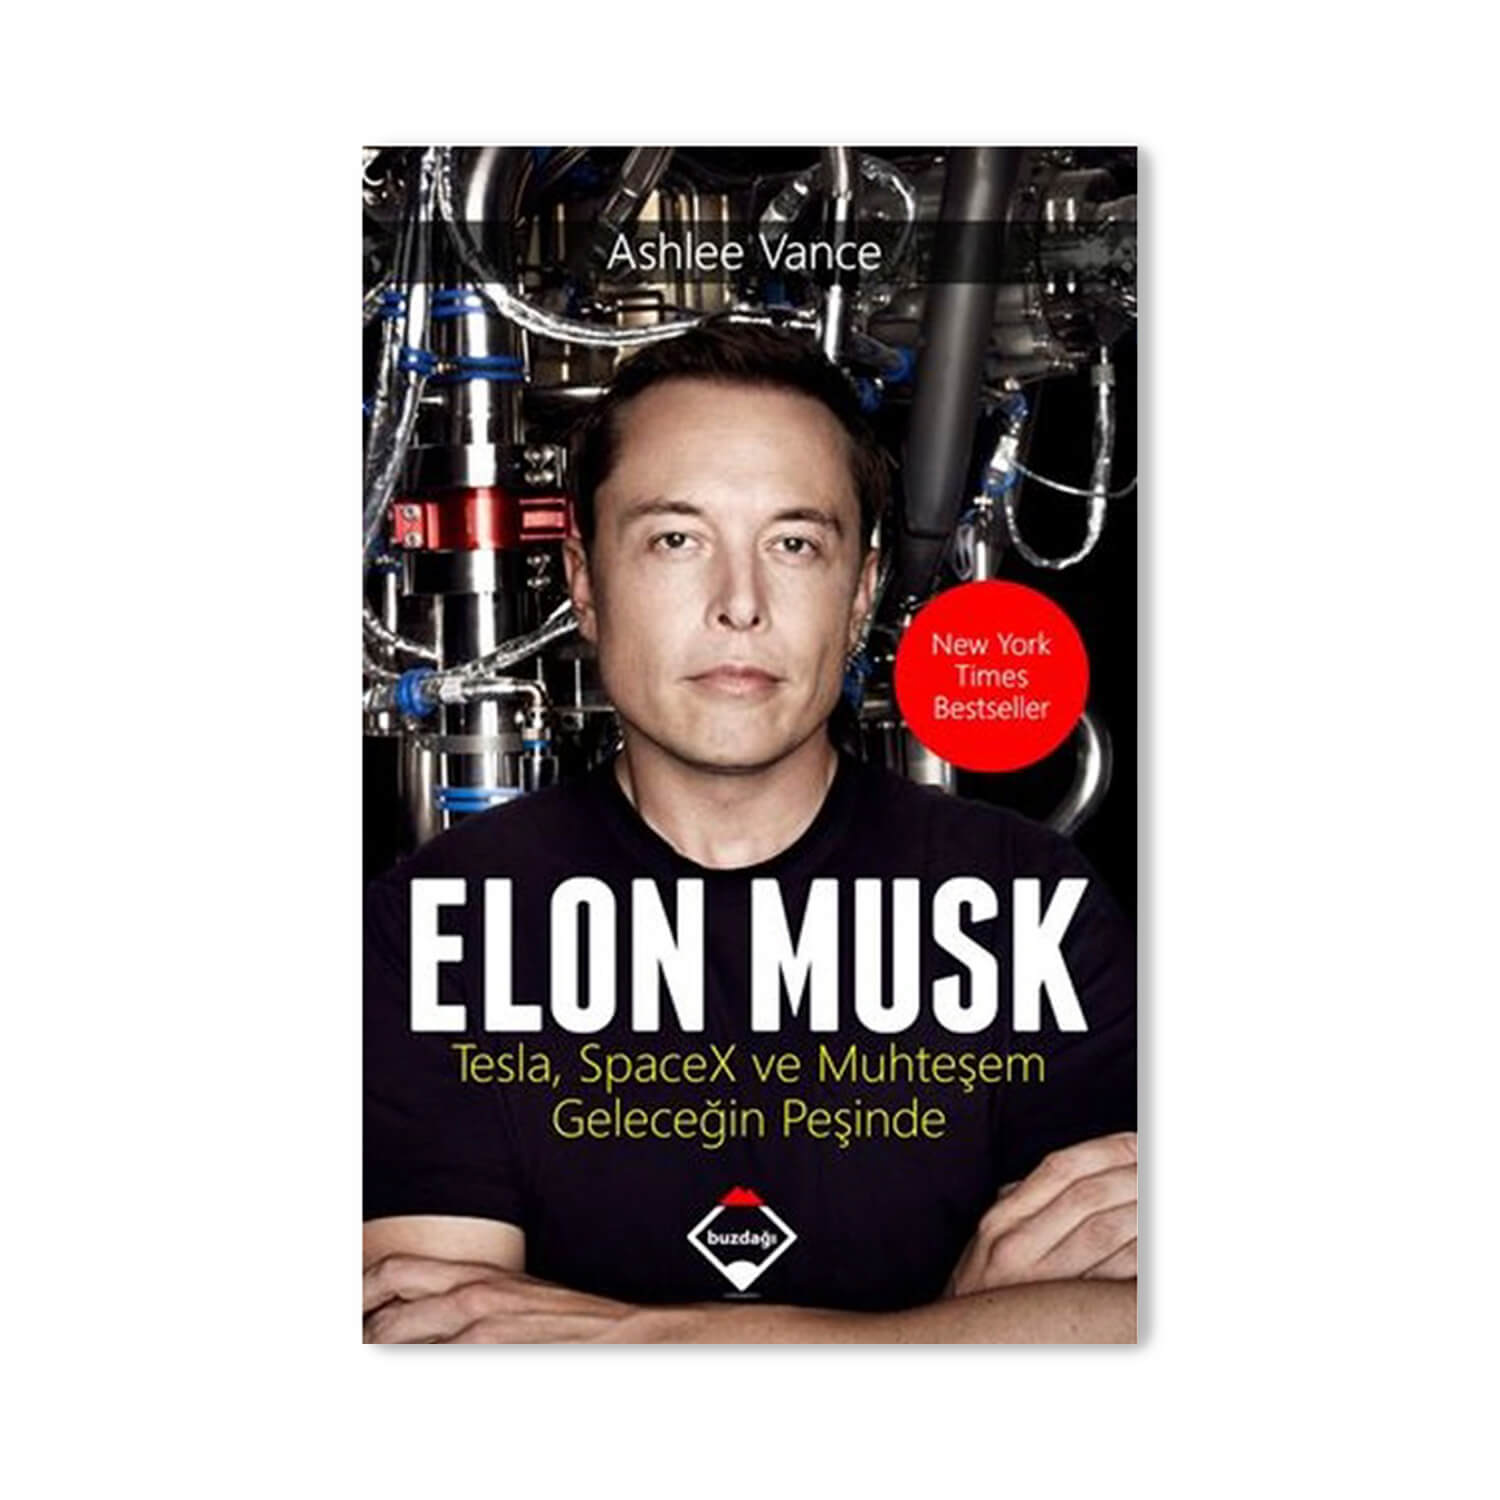 Elon Musk: Tesla, Spacex, And The Quest For A Fantastic